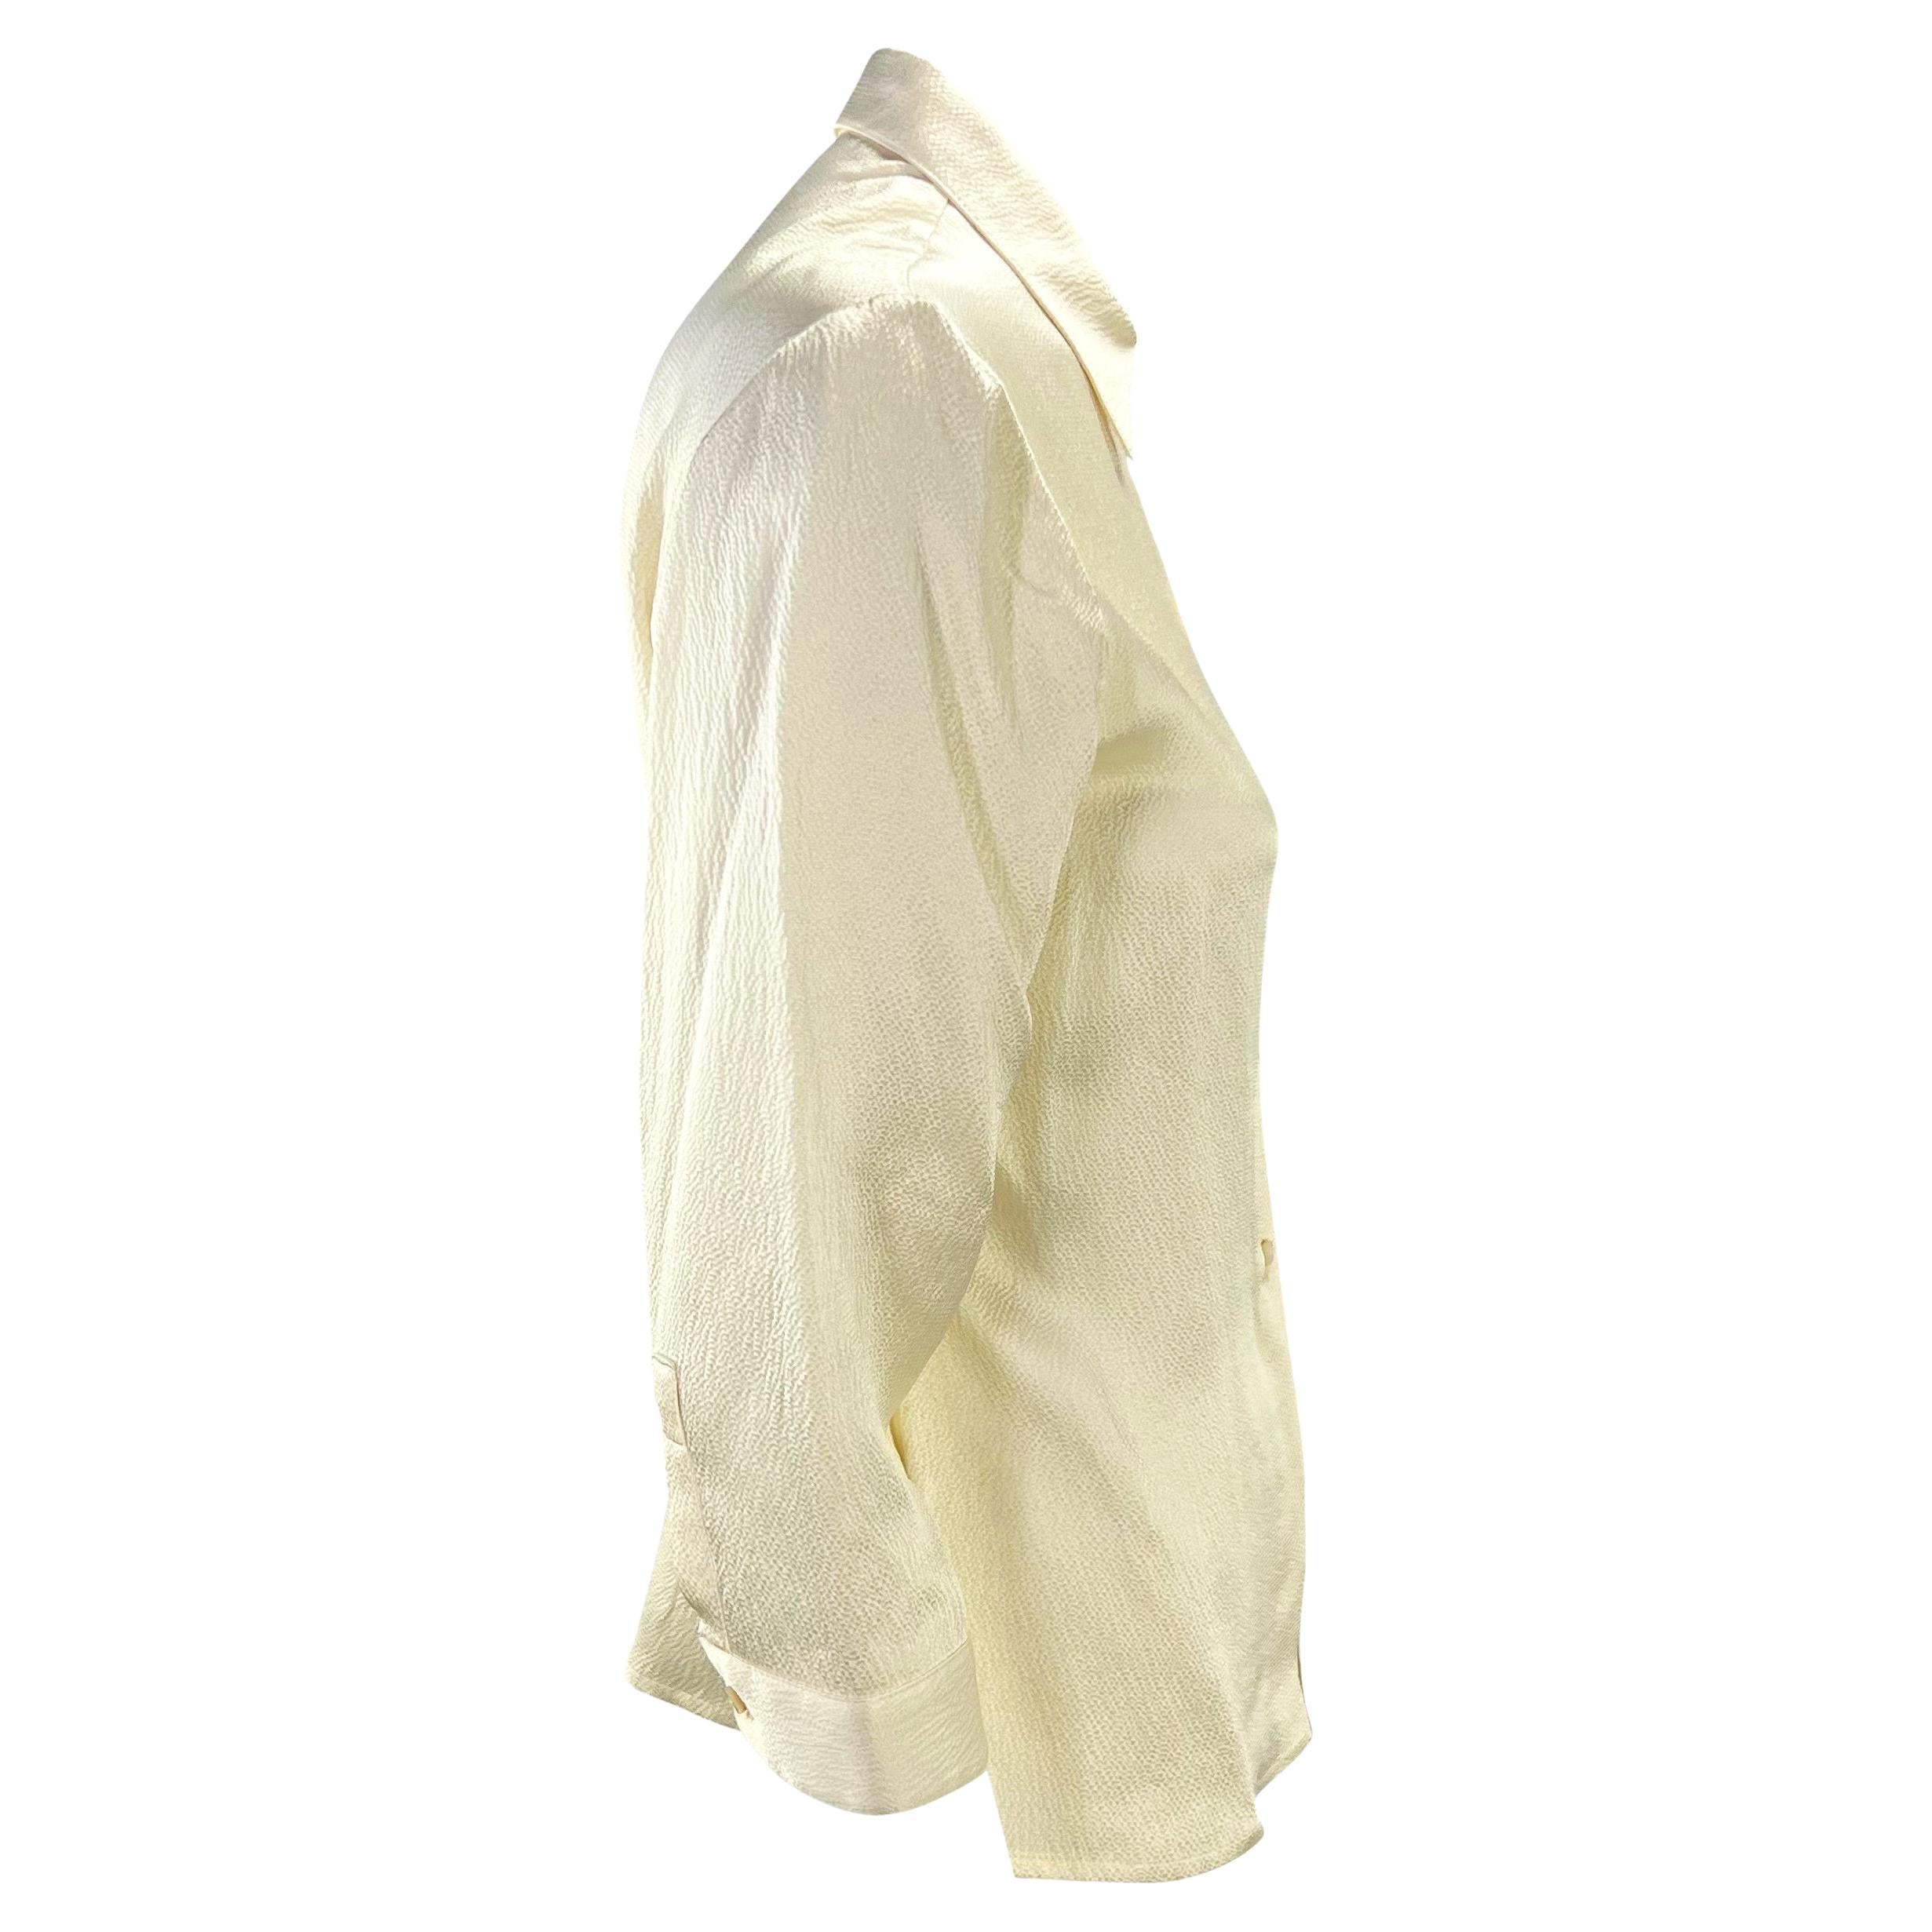 F/W 1999 Gianni Versace by Donatella Creme White Satin Crepe Button Up In Excellent Condition For Sale In West Hollywood, CA